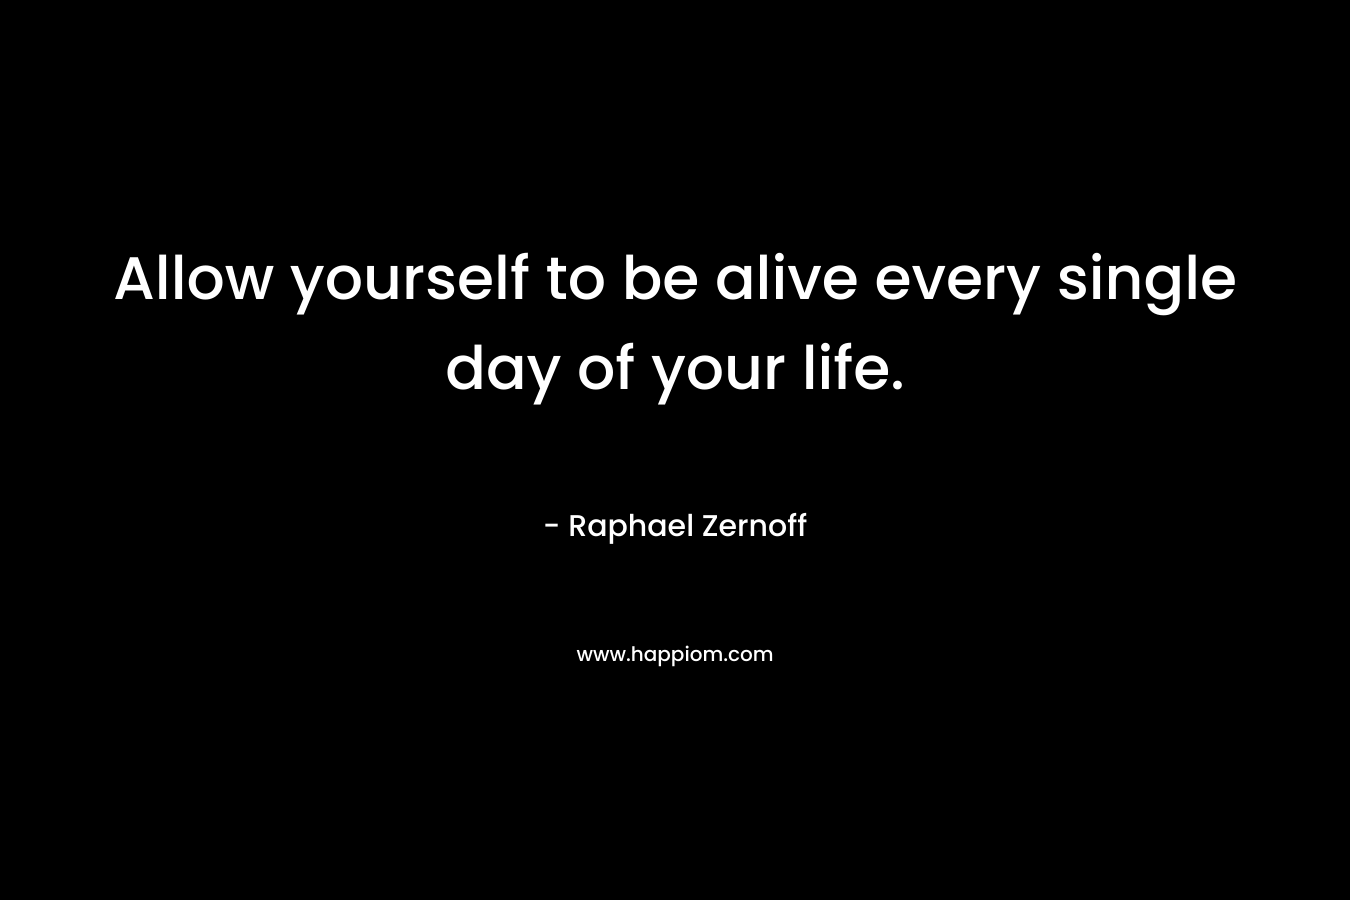 Allow yourself to be alive every single day of your life.